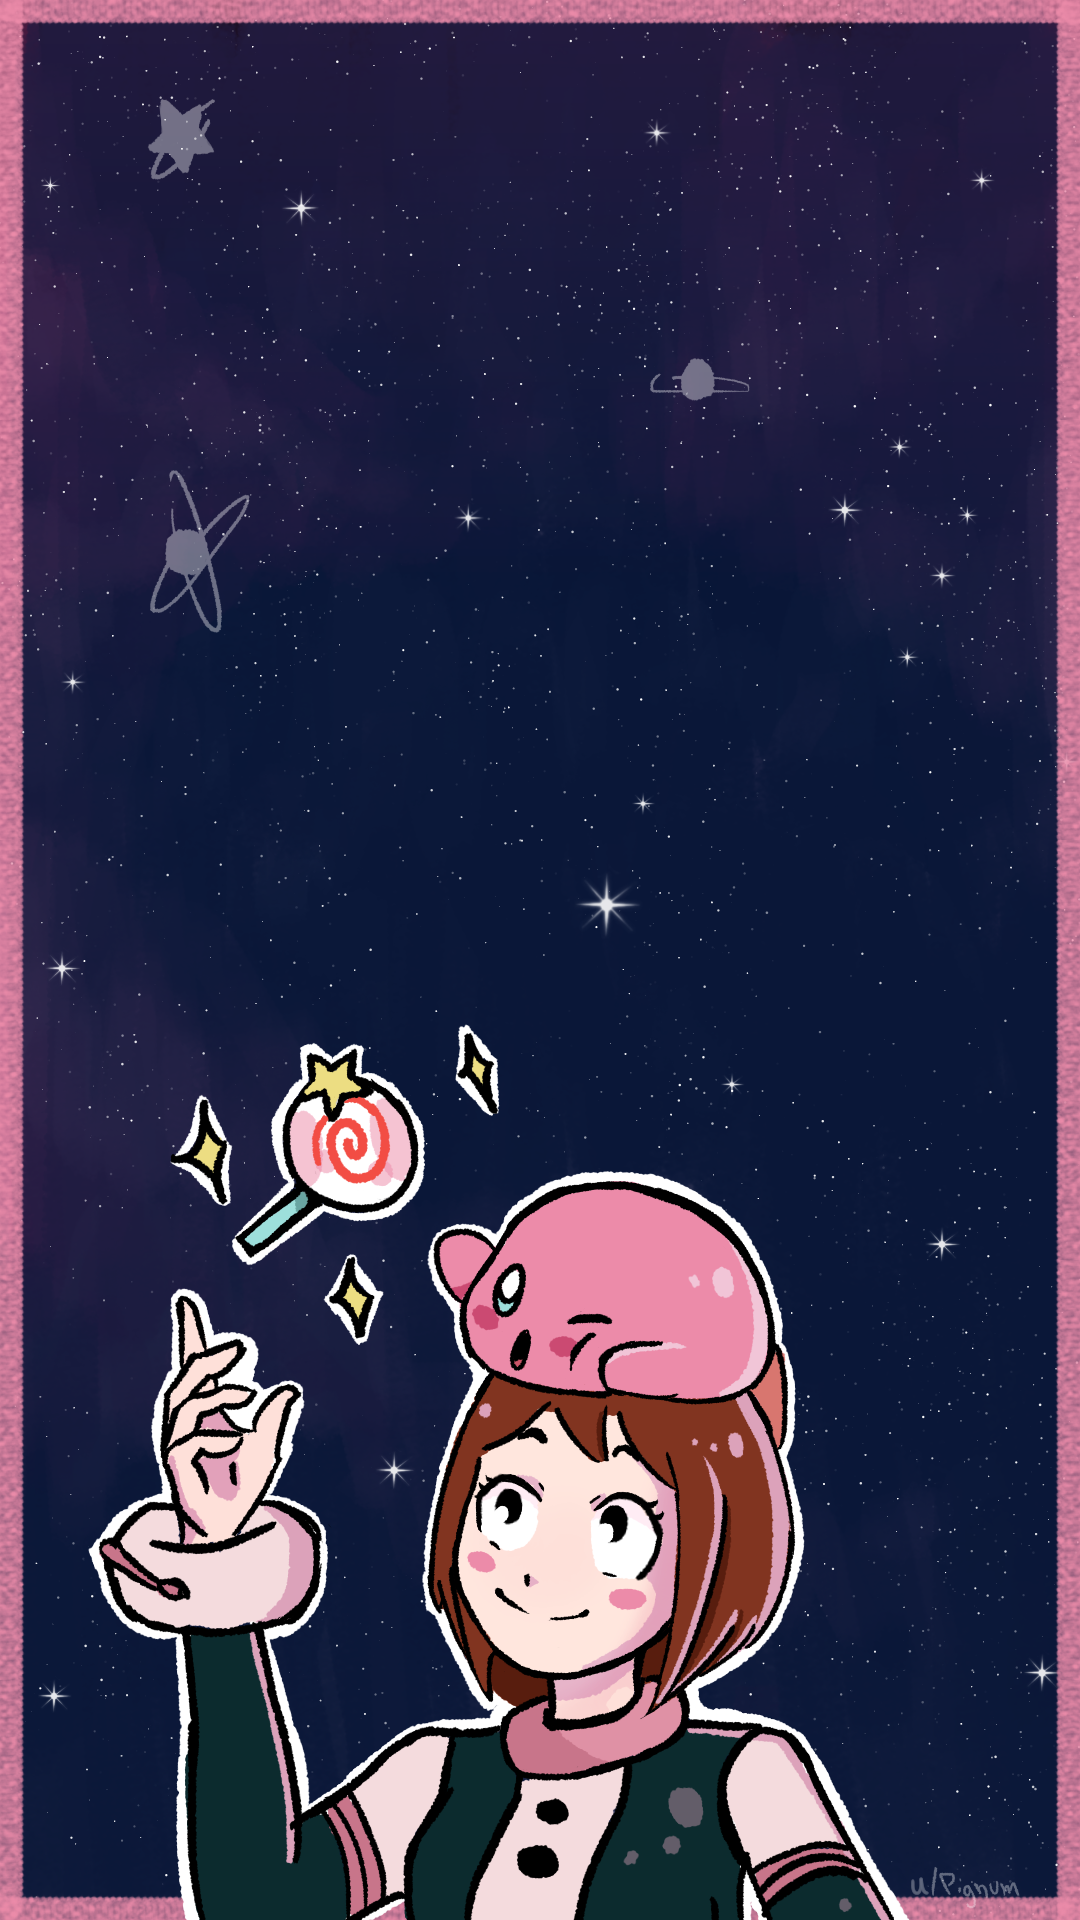 I made a phone wallpaper of Ochako and Kirby in a starry sky